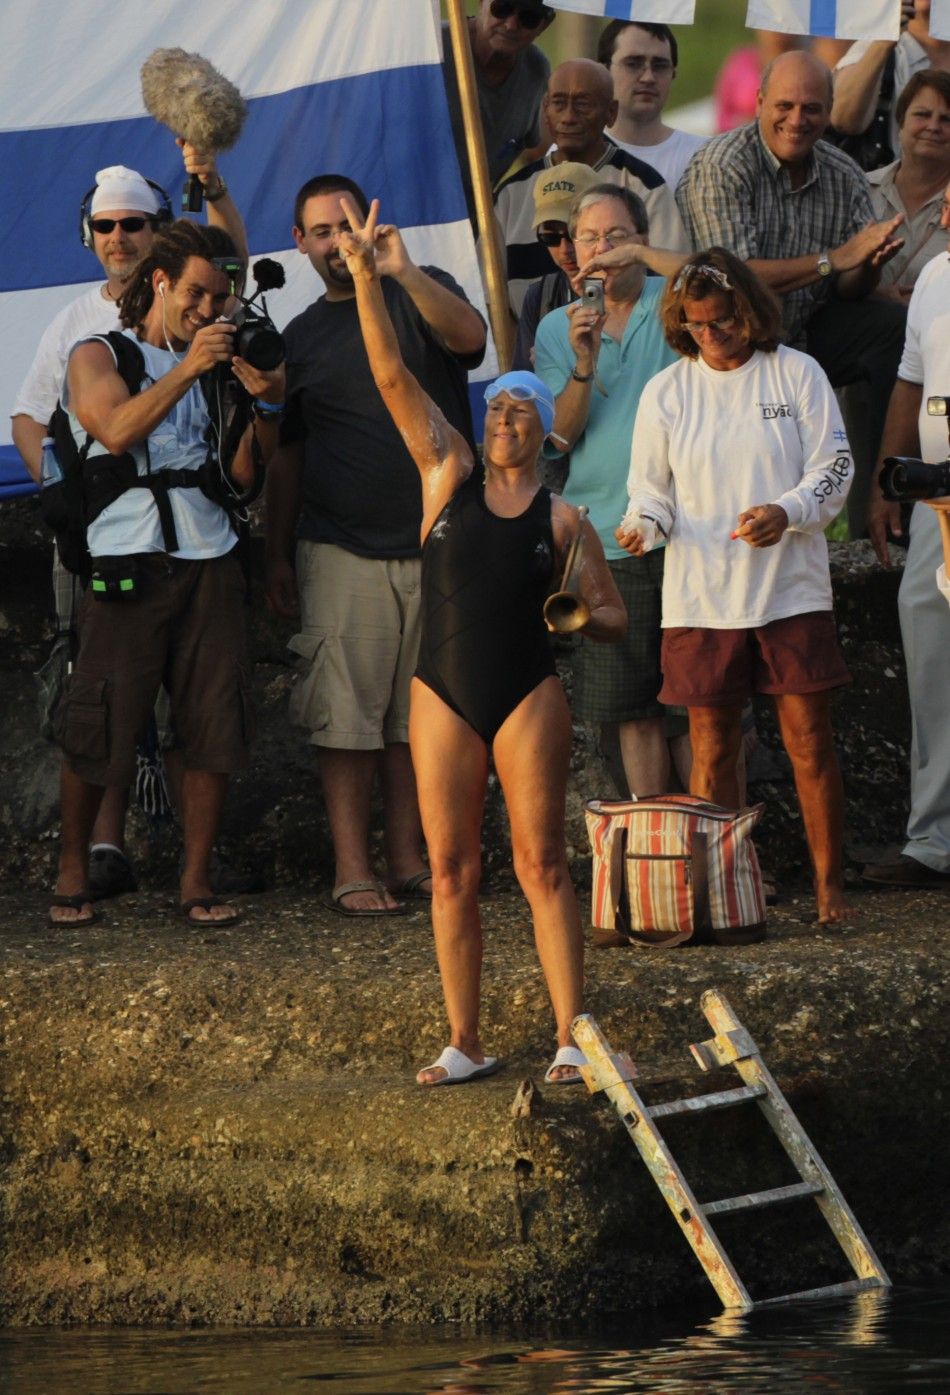 U.S. swimmer Diana Nyad flashes the victory sign before her attempt to swim to Florida from Havana.